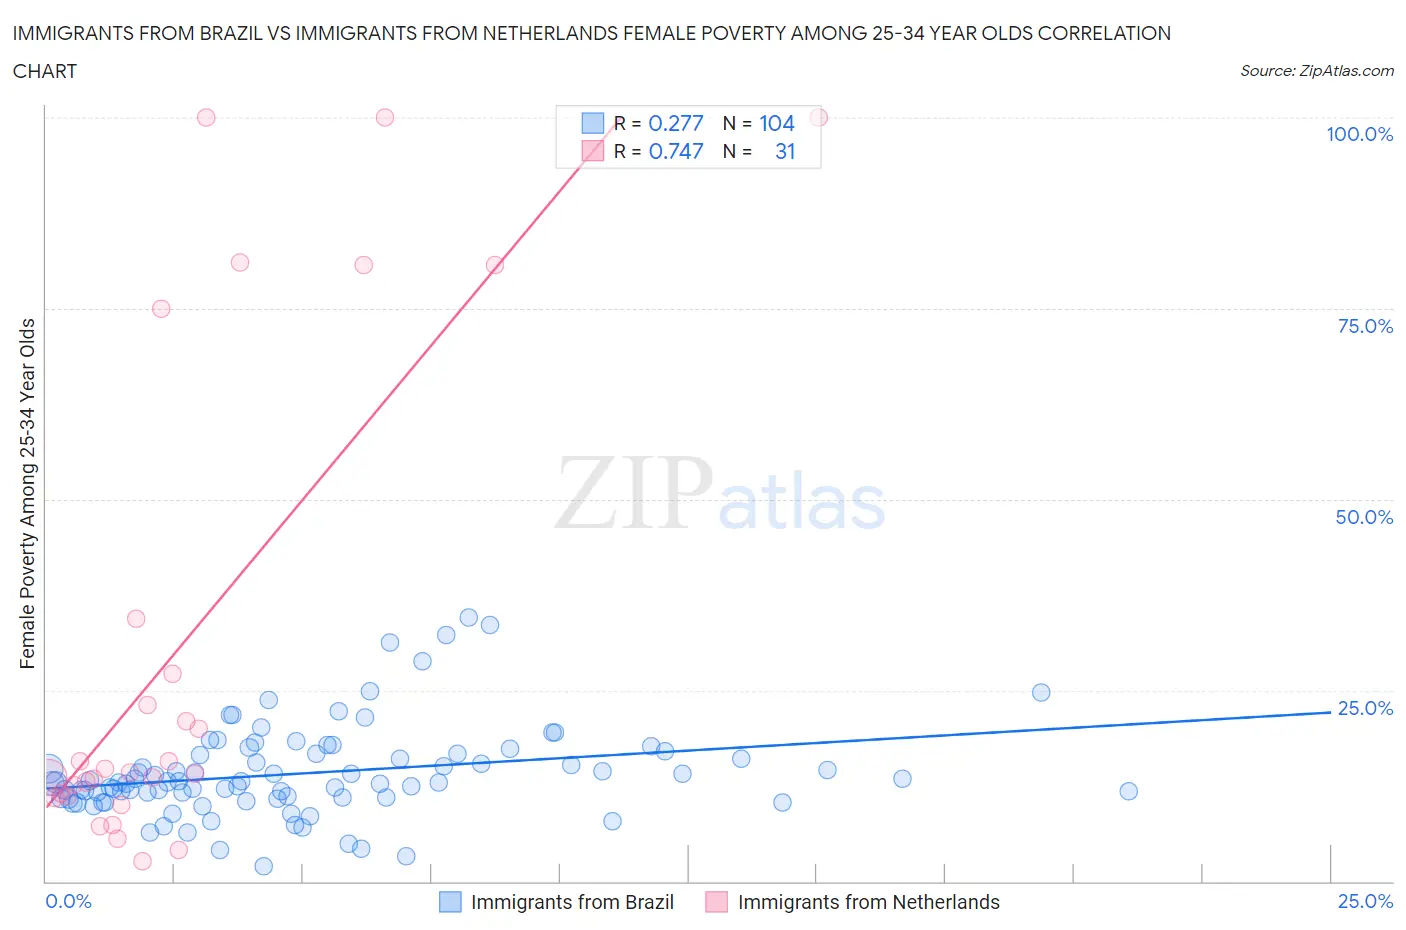 Immigrants from Brazil vs Immigrants from Netherlands Female Poverty Among 25-34 Year Olds